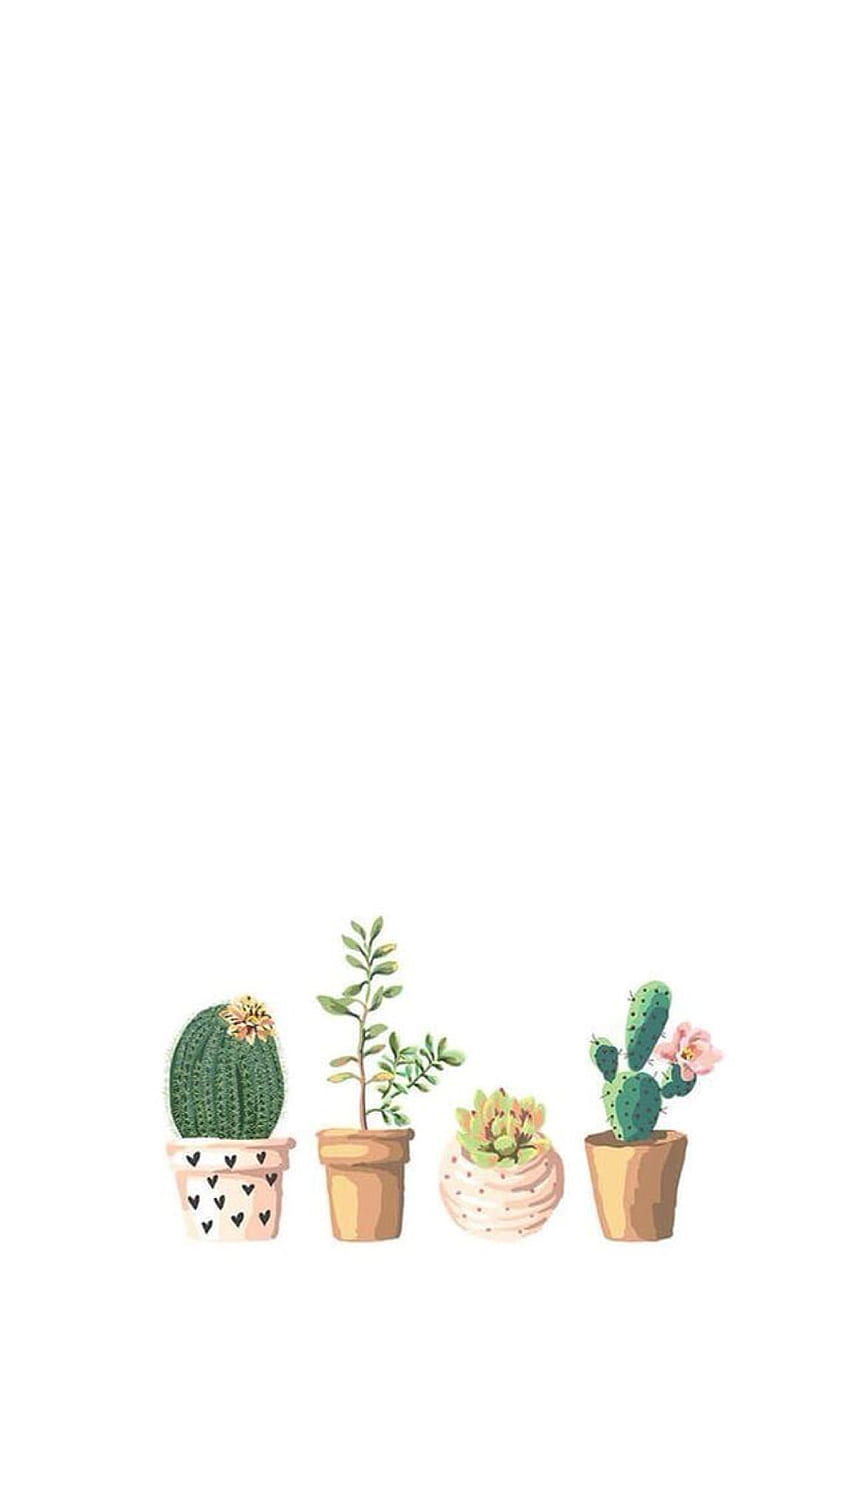 A cactus wallpaper with four different types of plants - Plants